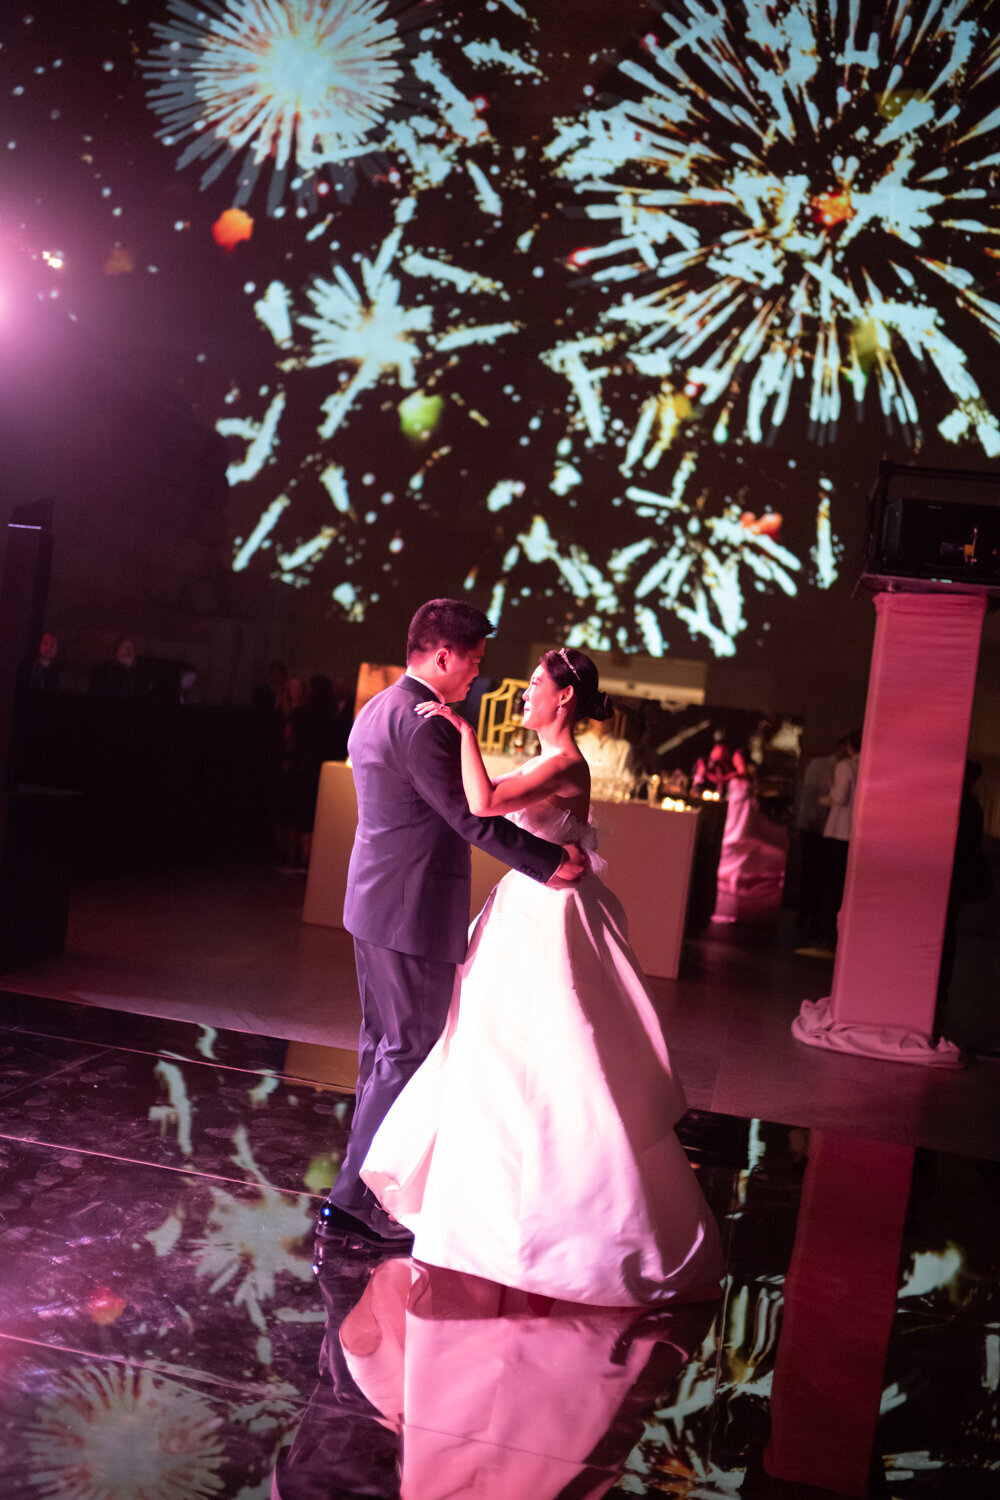 Bride and groom dancing with fireworks at the metropolitan museum of art